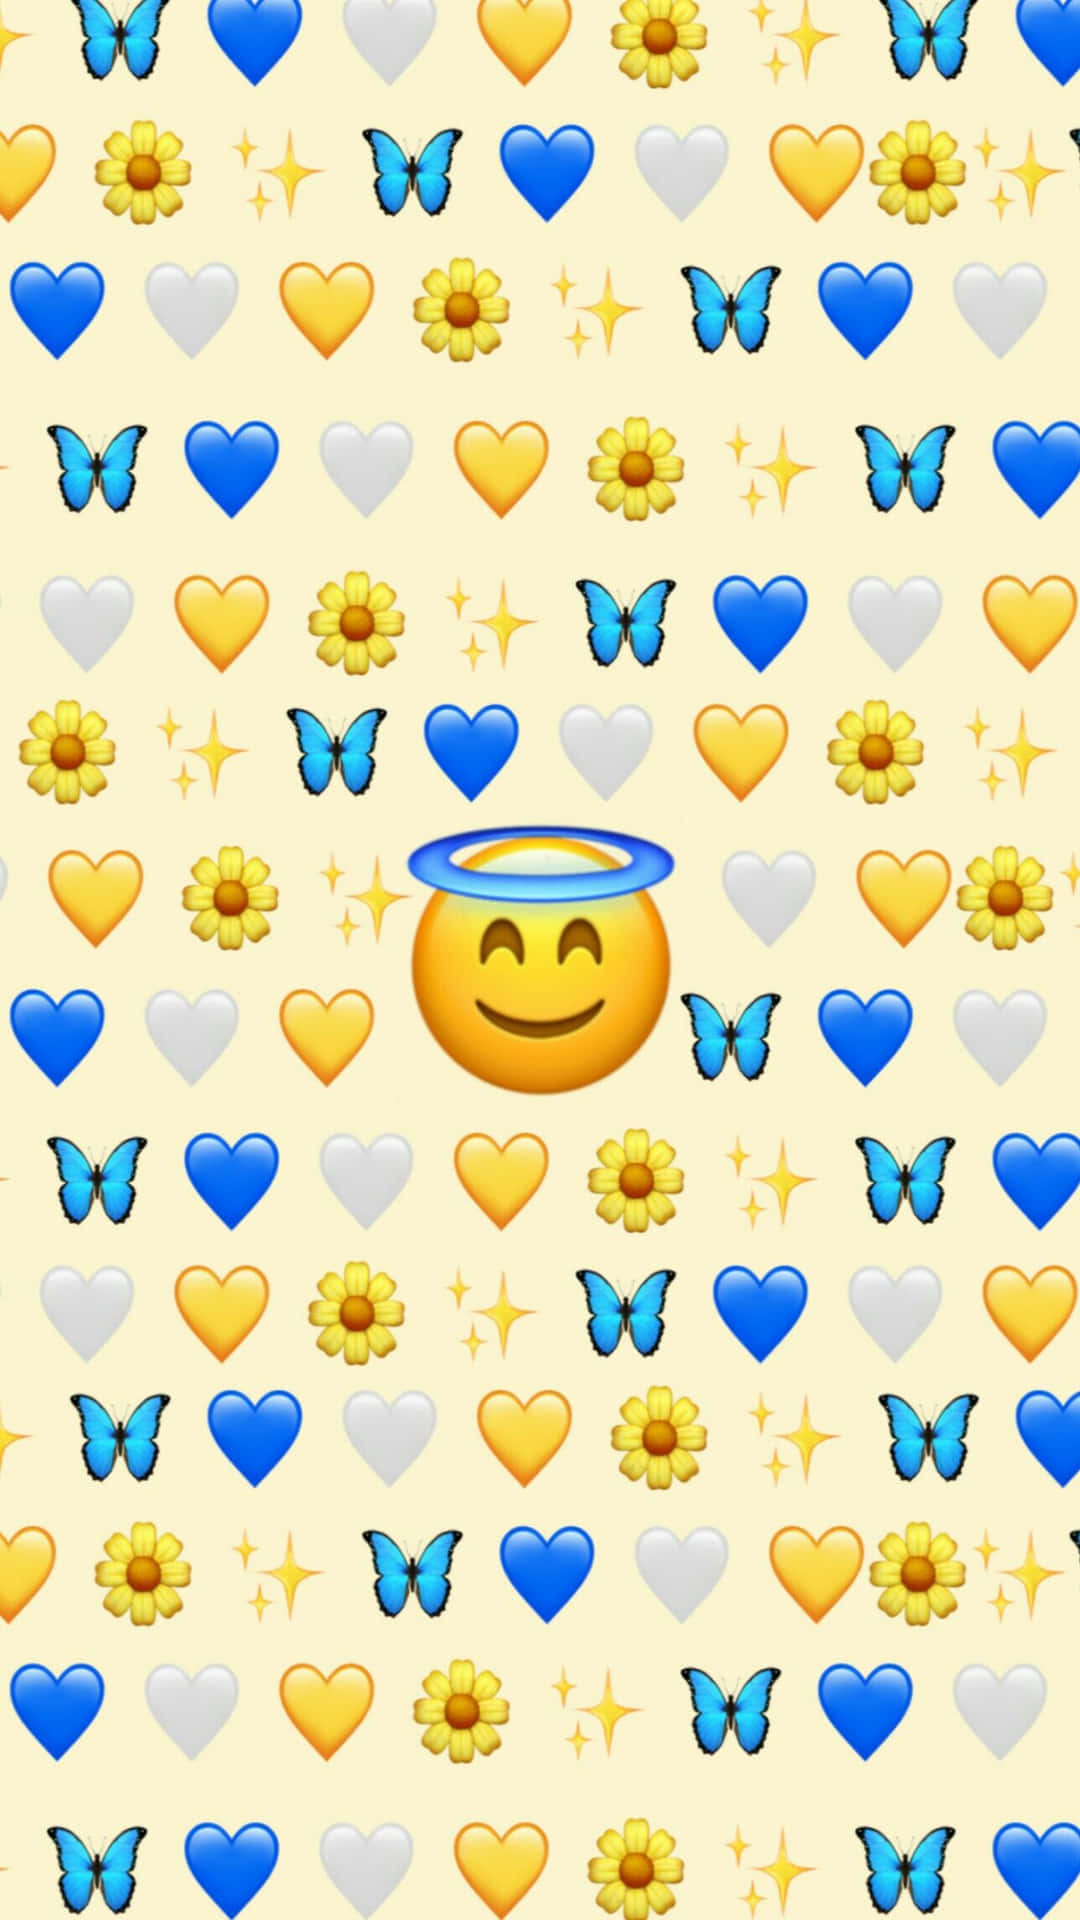 Show your emotions with this cute emoji Wallpaper